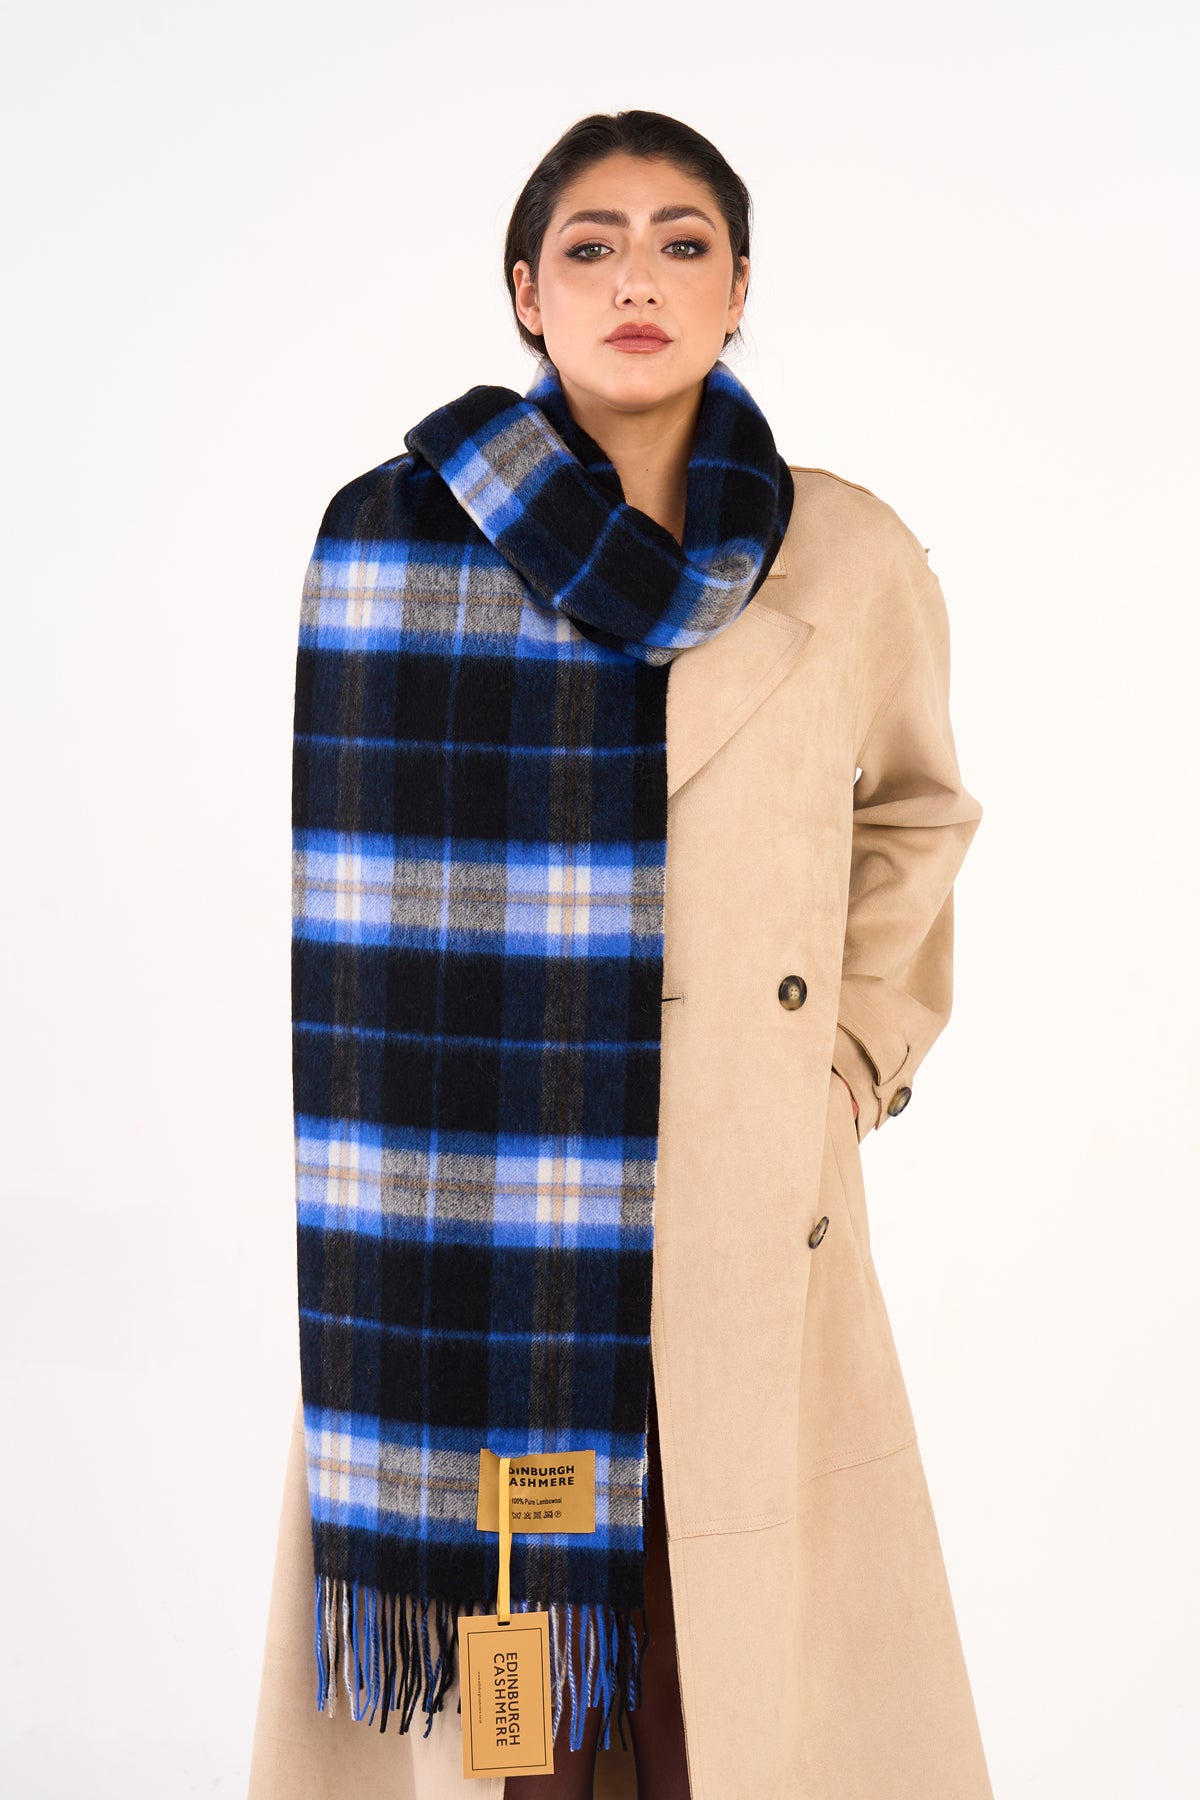 100% Pure Lambswool Oversized Scarf/Wrap Thomson Black/Blue 28